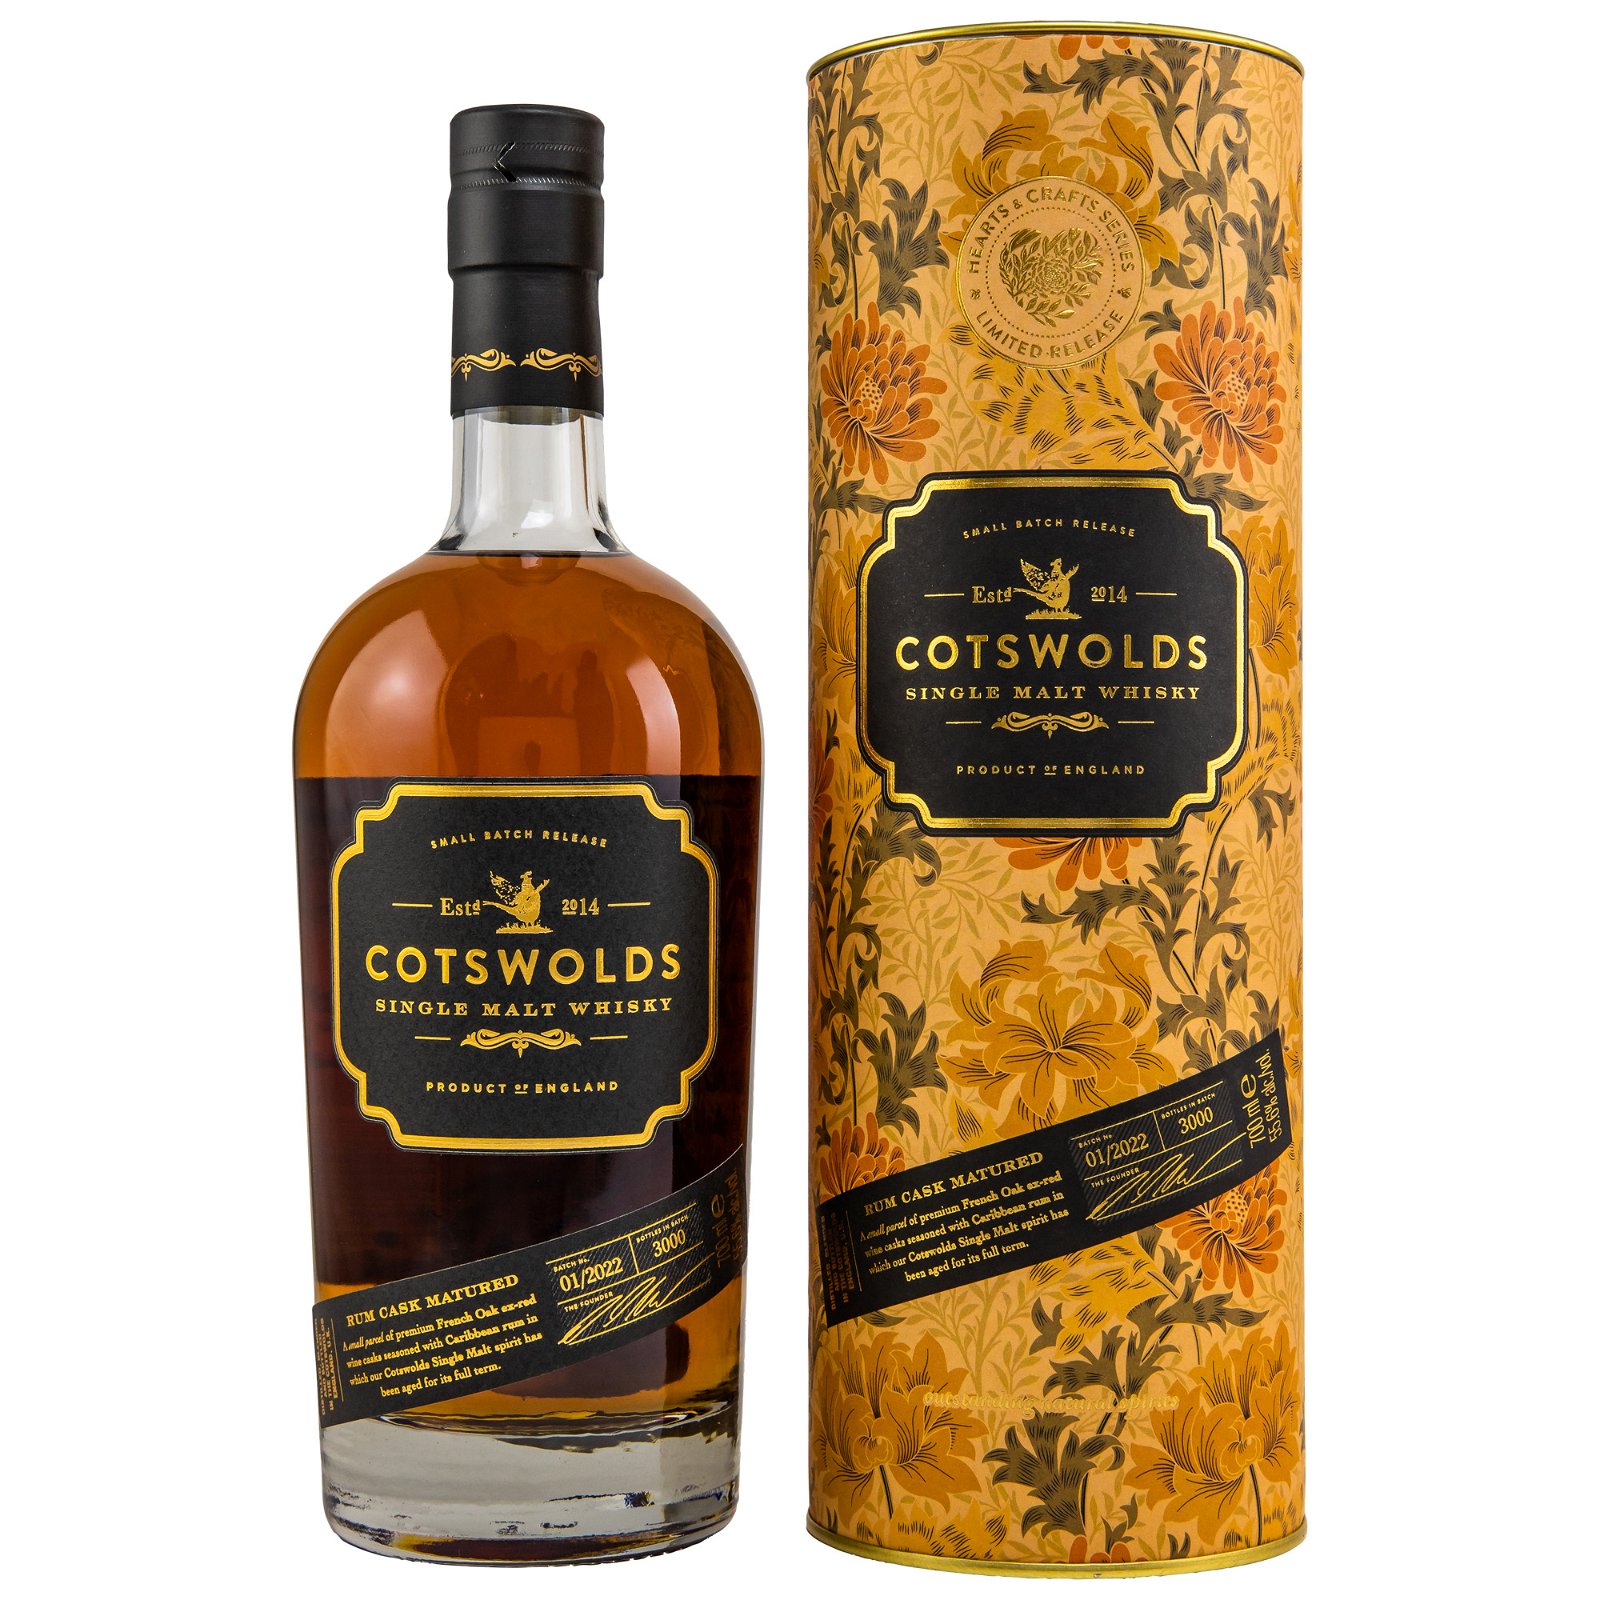 Cotswolds Rum Cask Matured Hearts & Crafts Series